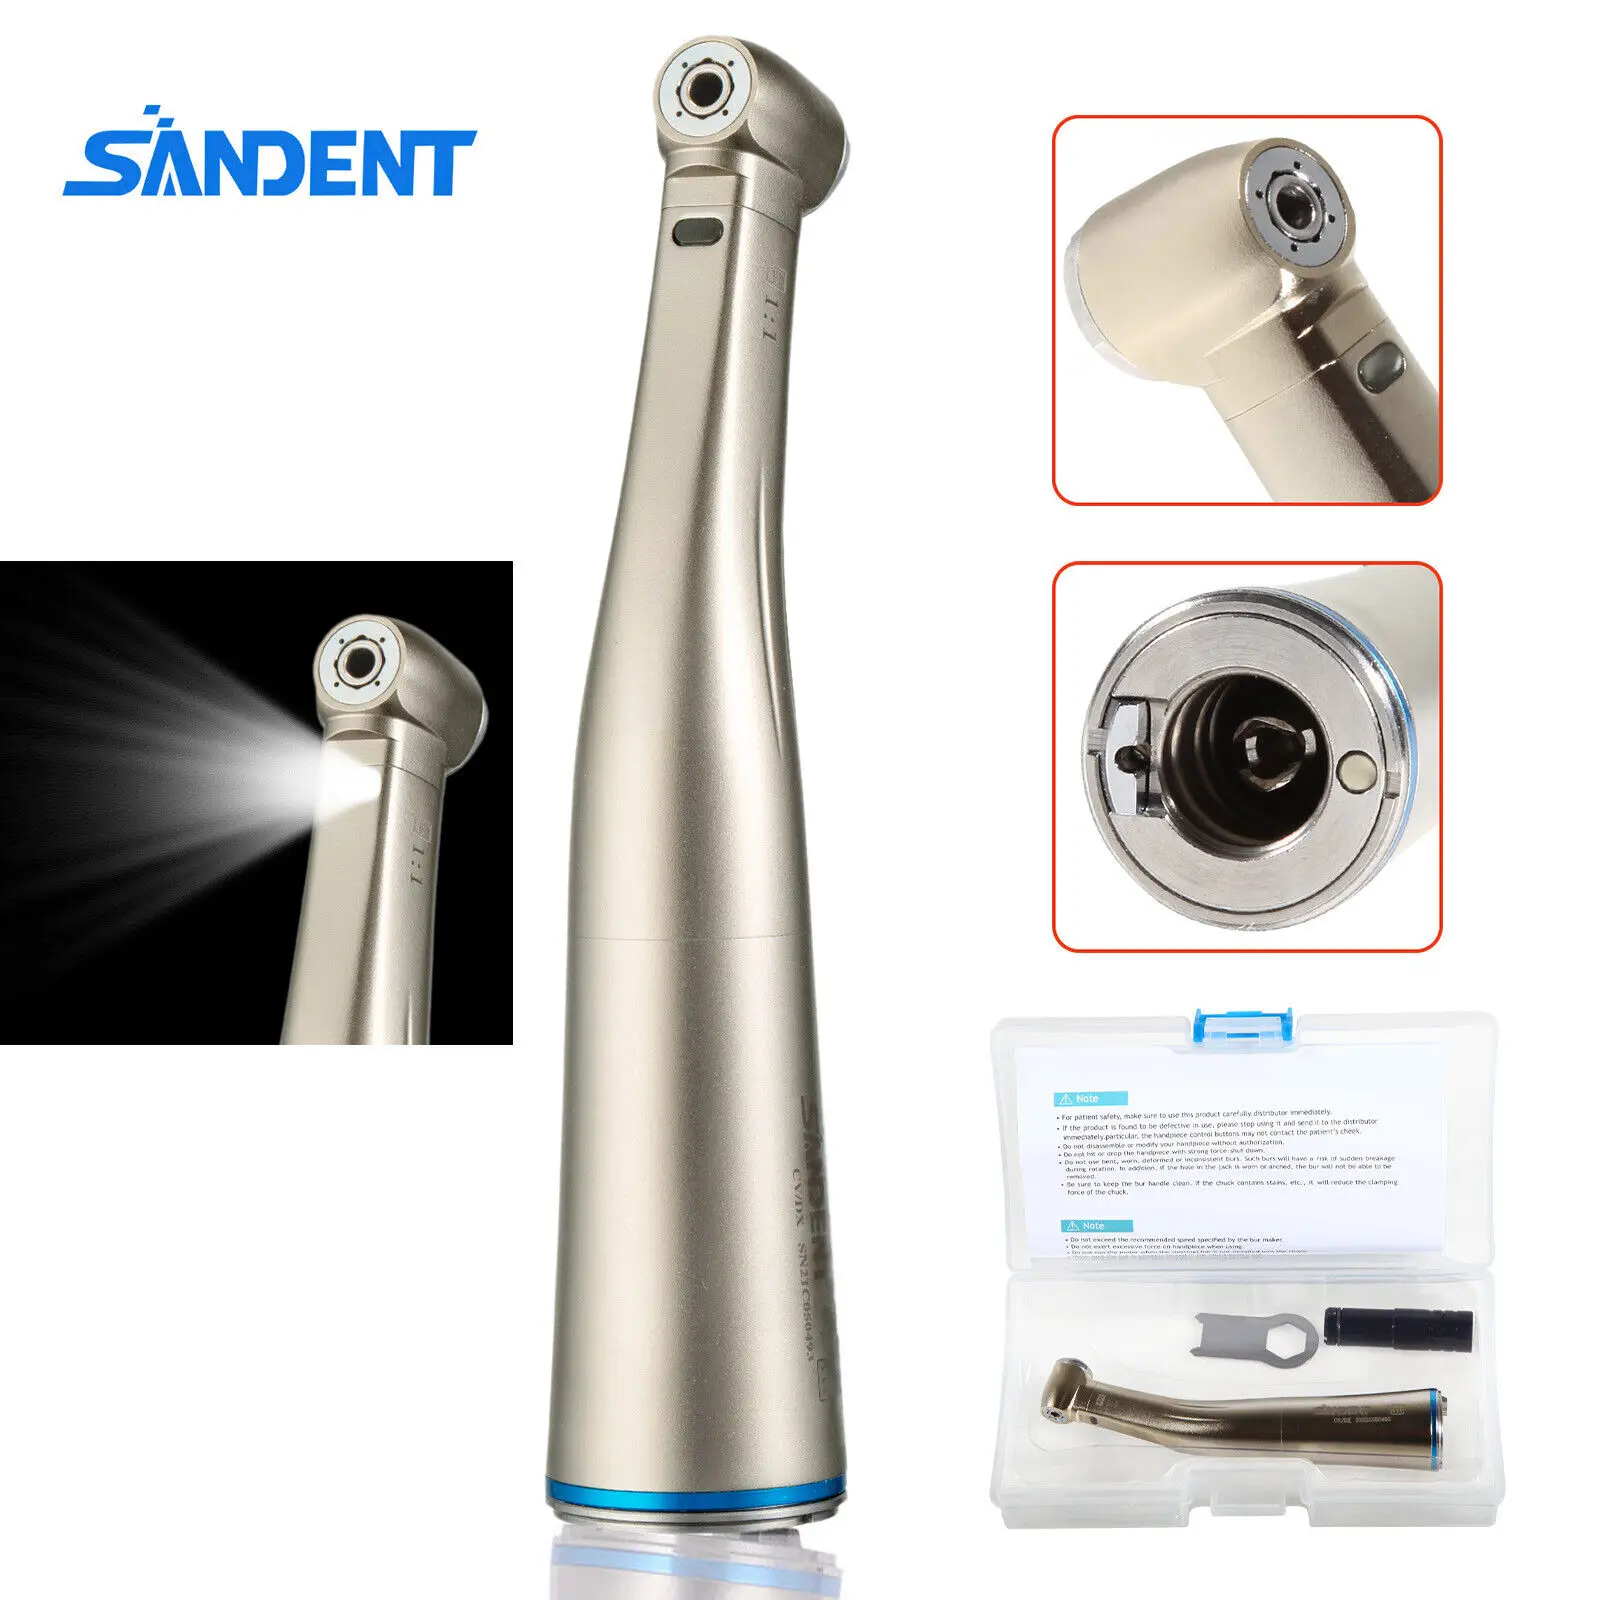 

1:1 Dental LED Light Fiber Optic Contra Angle Internal Water Spray Low Speed Handpiece Blue Ring Fit NSK Kavo